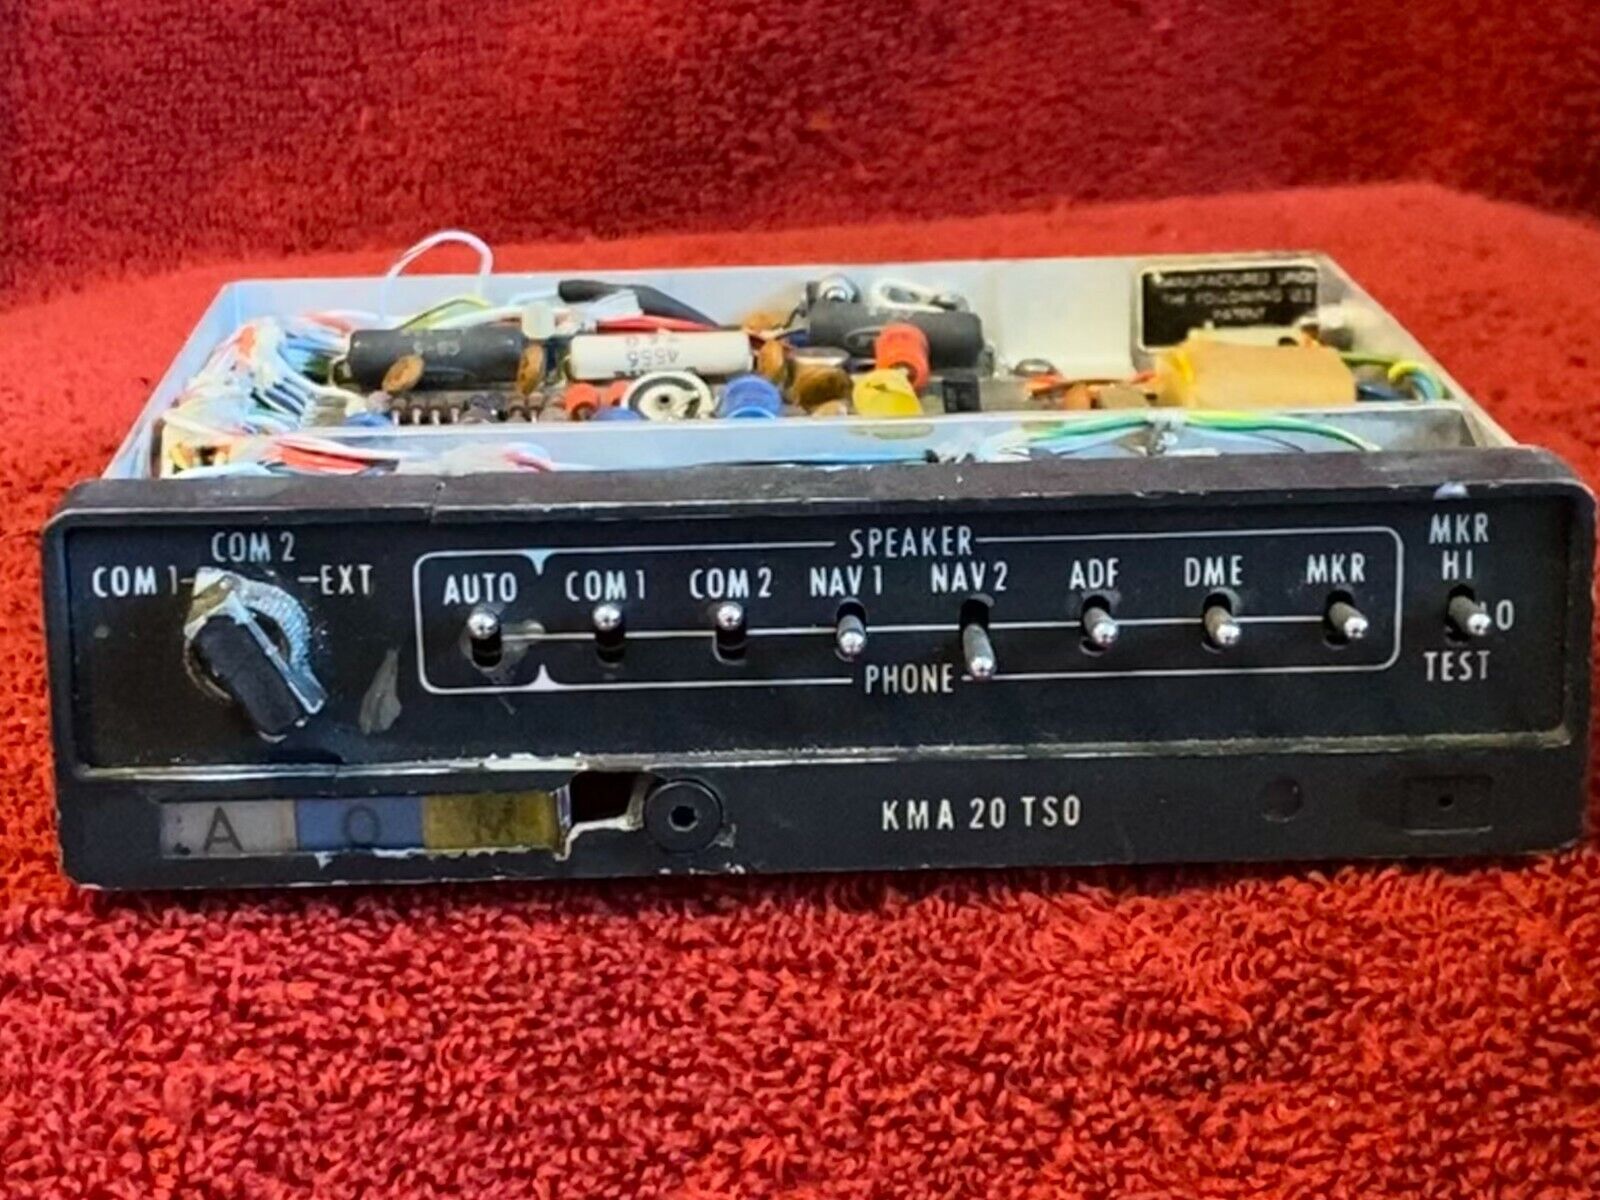 KING KMA 20 MARKER BEACON RECEIVER AND ISOLATION AMPLIFIER P/N 066-1024-03 CORE